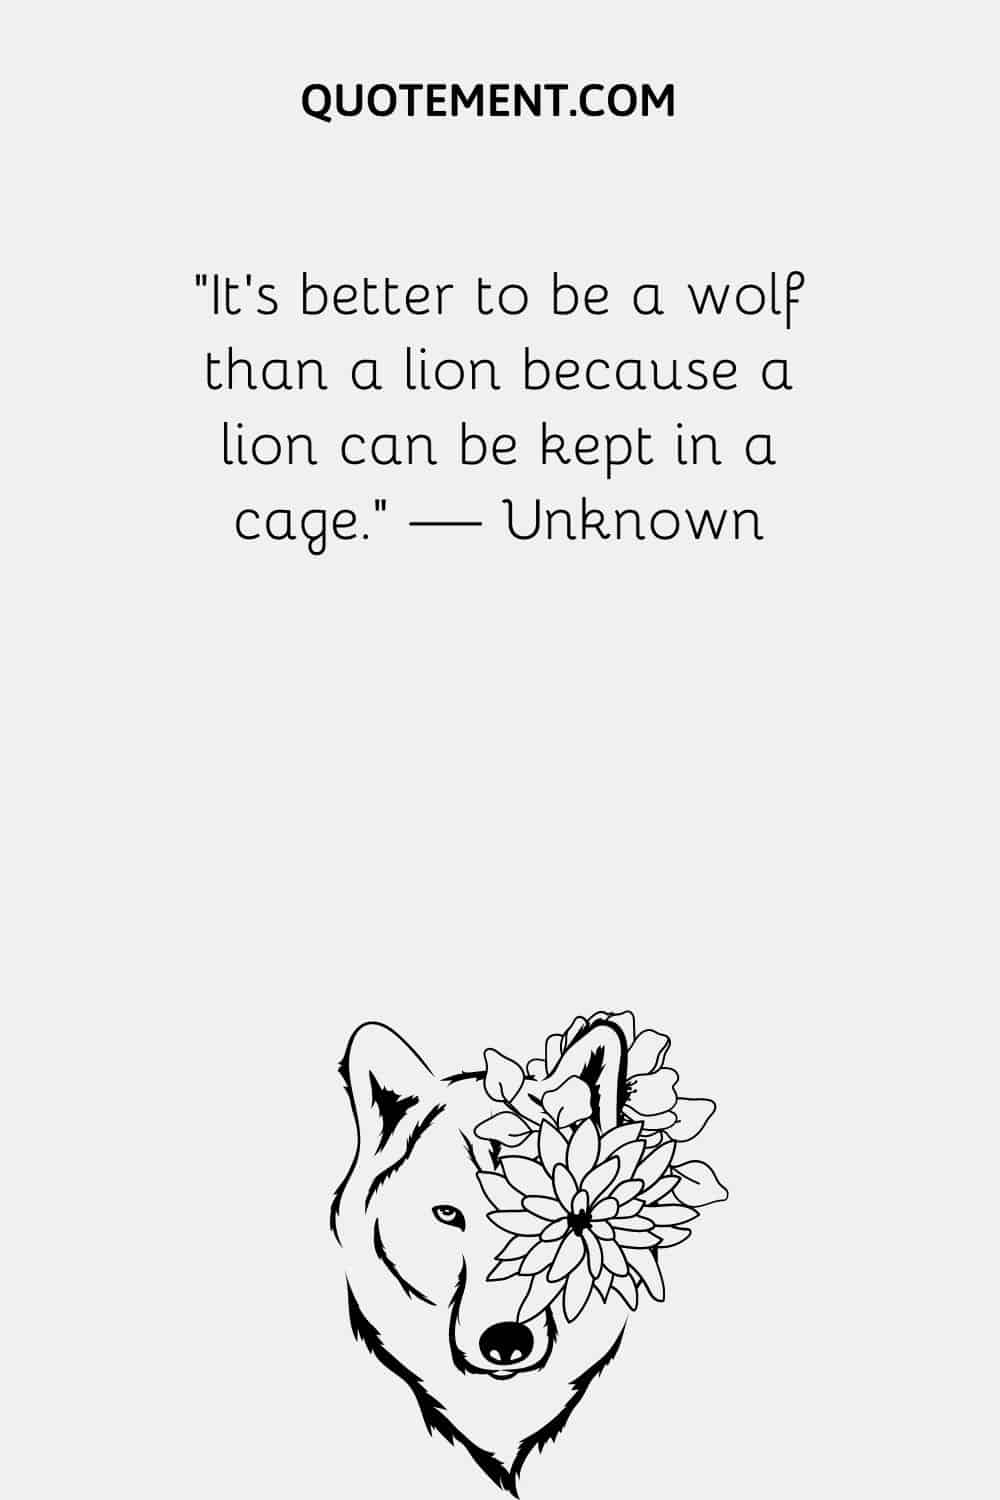 It’s better to be a wolf than a lion because a lion can be kept in a cage